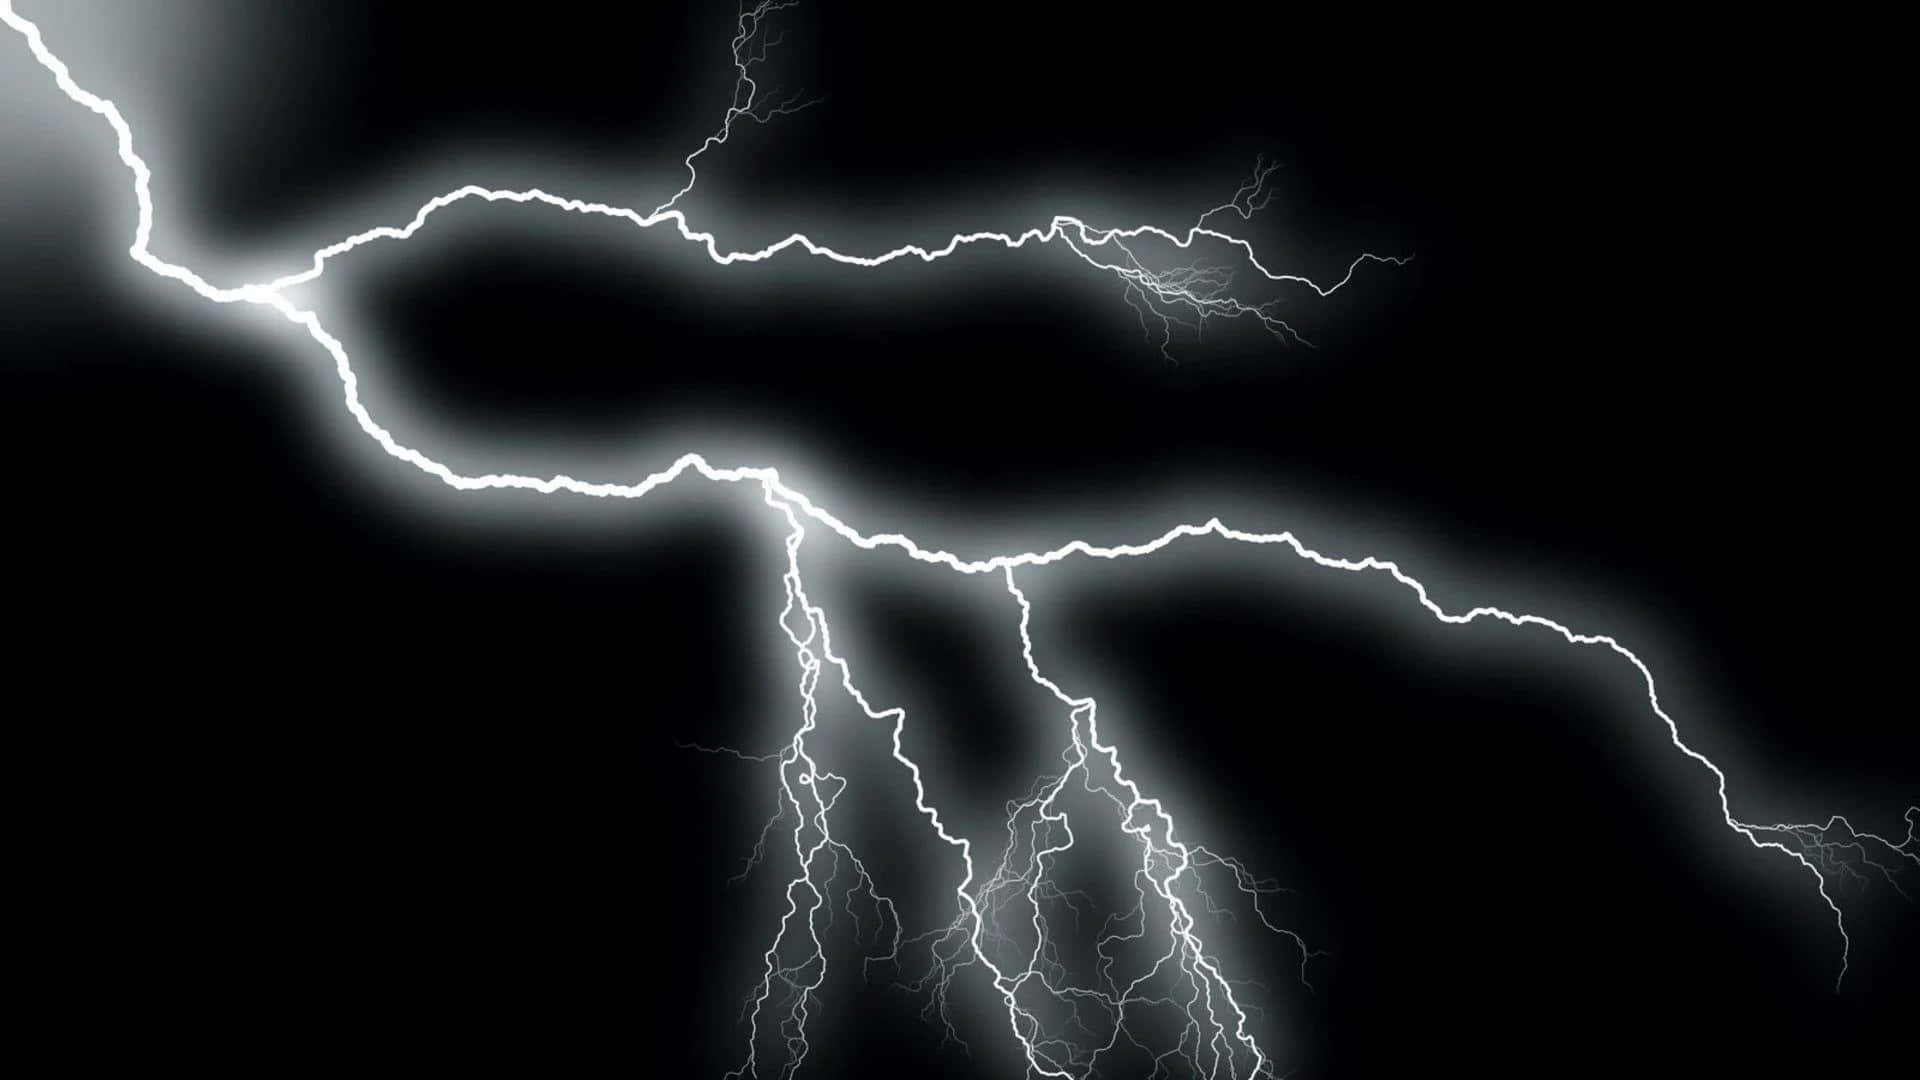 A dynamic electric charge with a powerful lightning bolt against a black sky